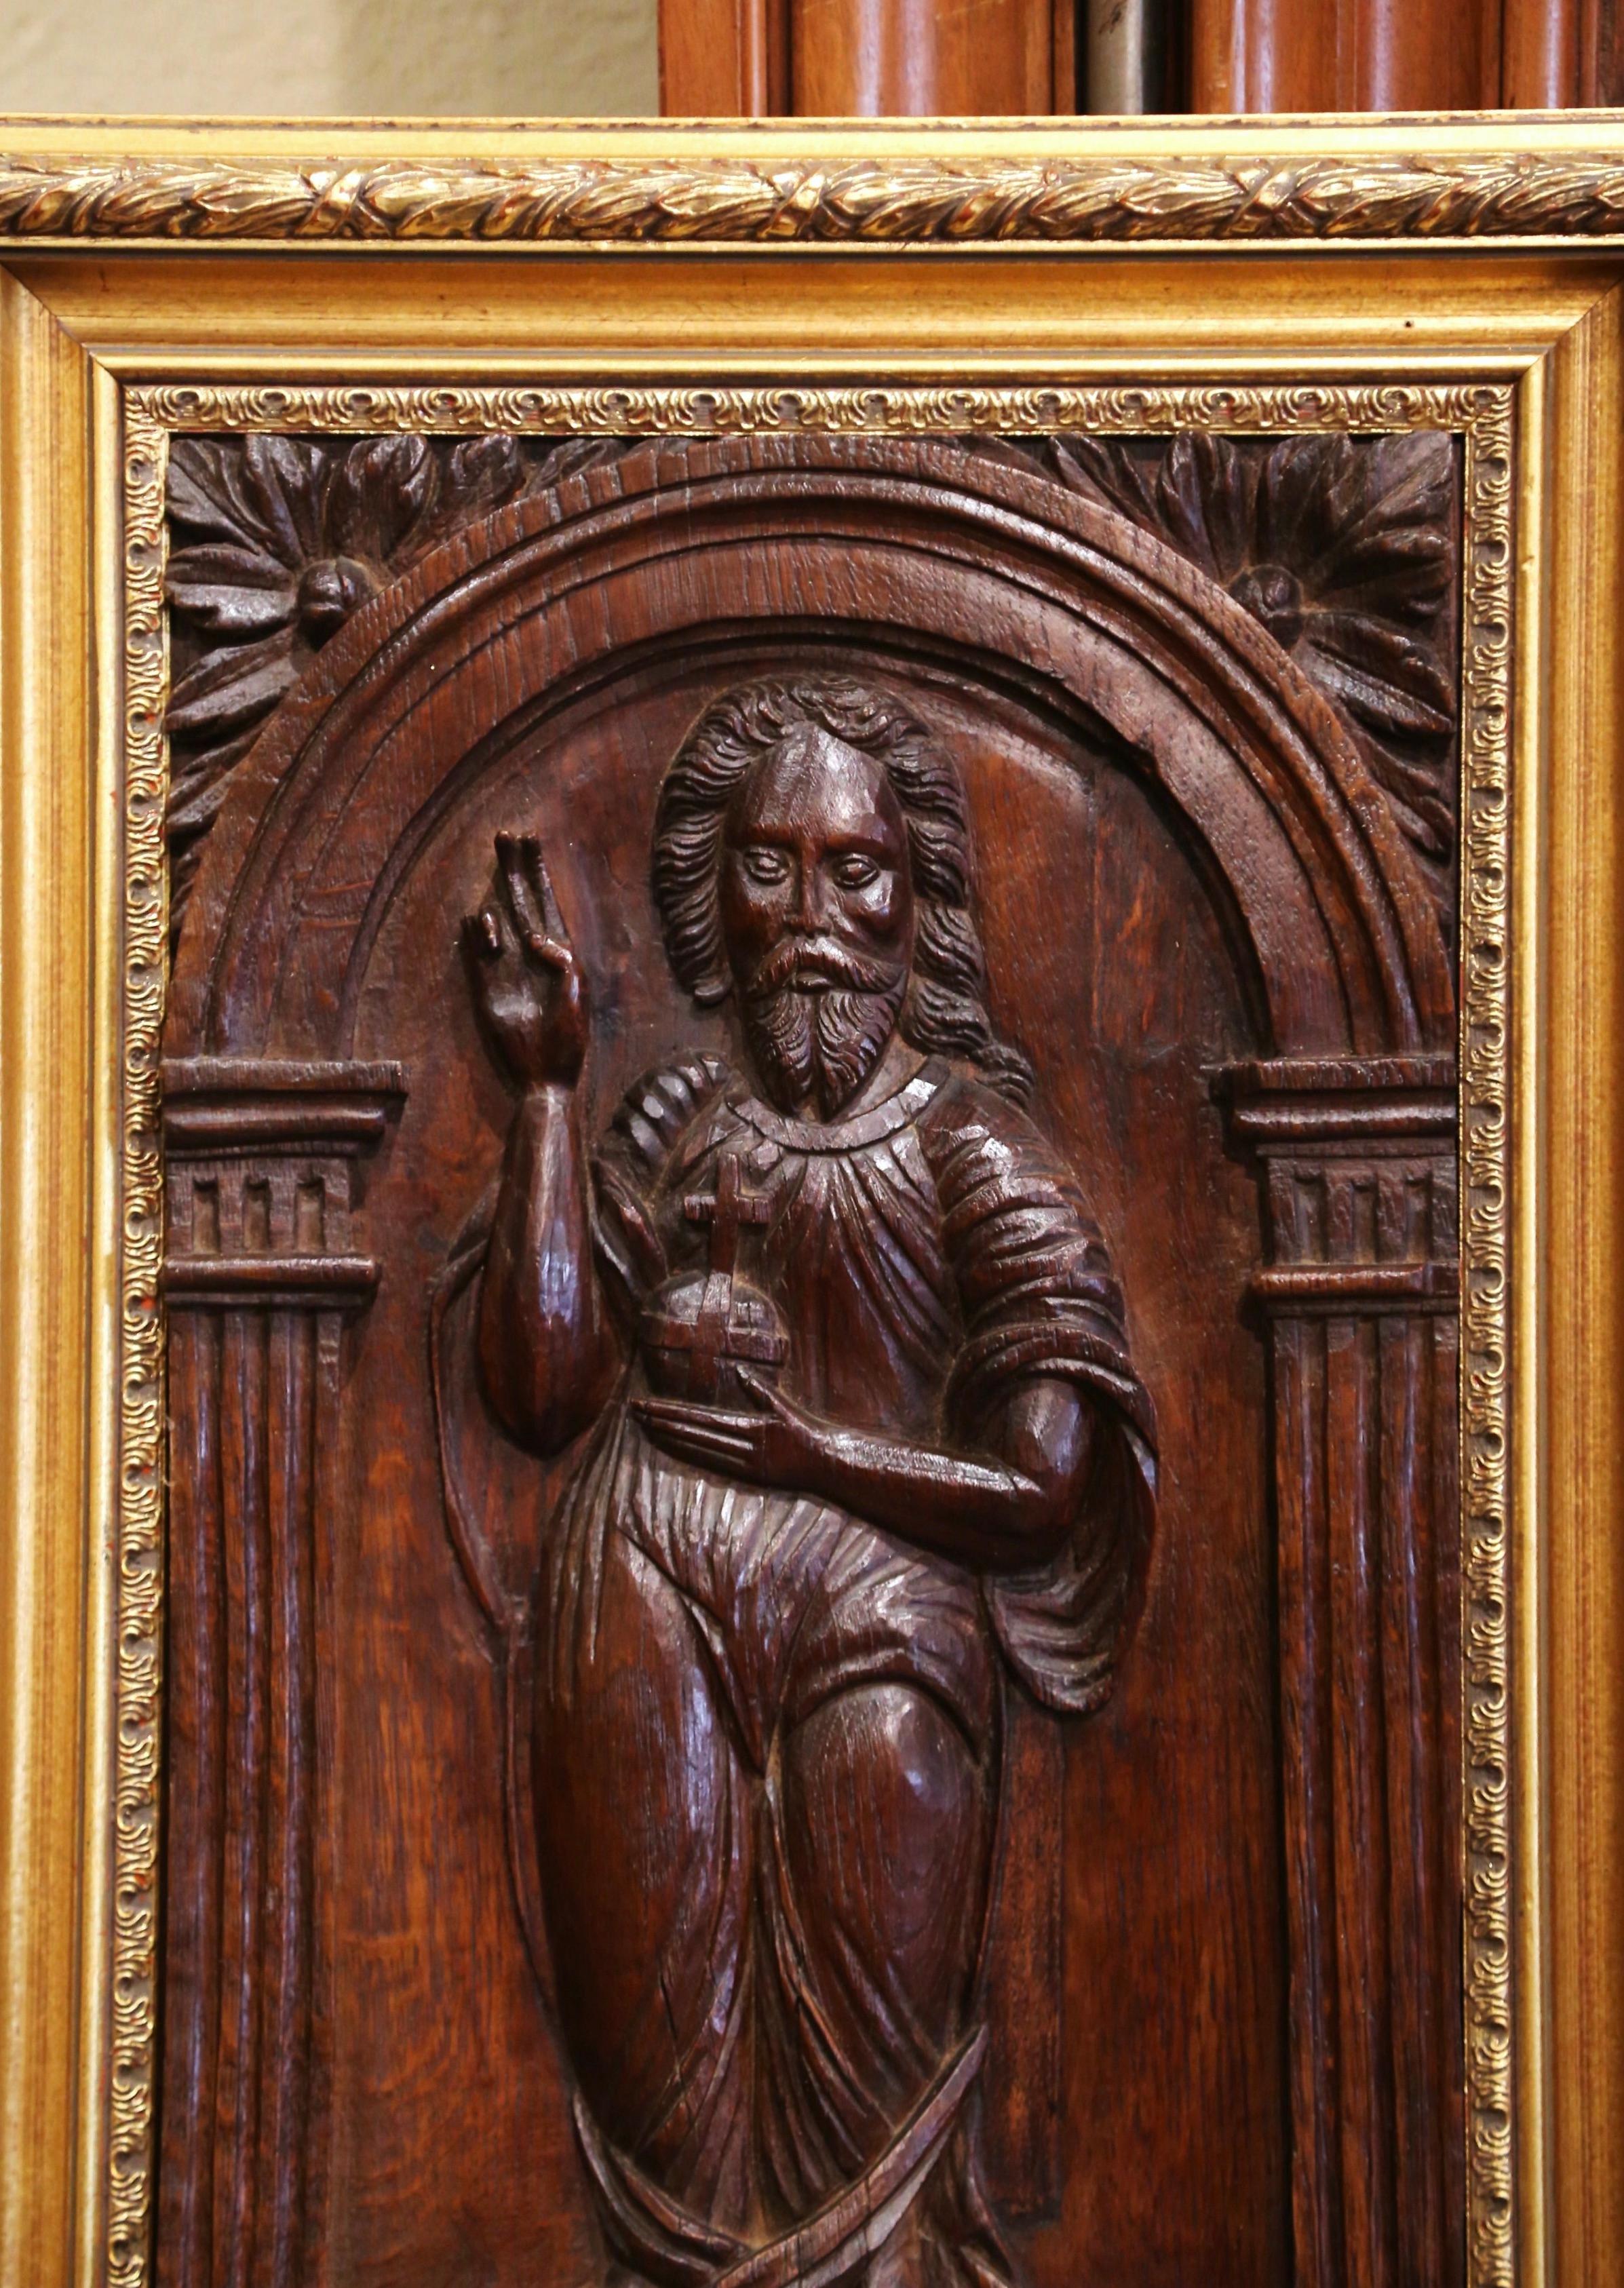 This antique sculpture was crafted in France, circa 1780. Set in a giltwood frame and carved of oakwood, the panel depicts our Lord Jesus Christ standing inside an arched door with the right raised in blessing, in reference to 